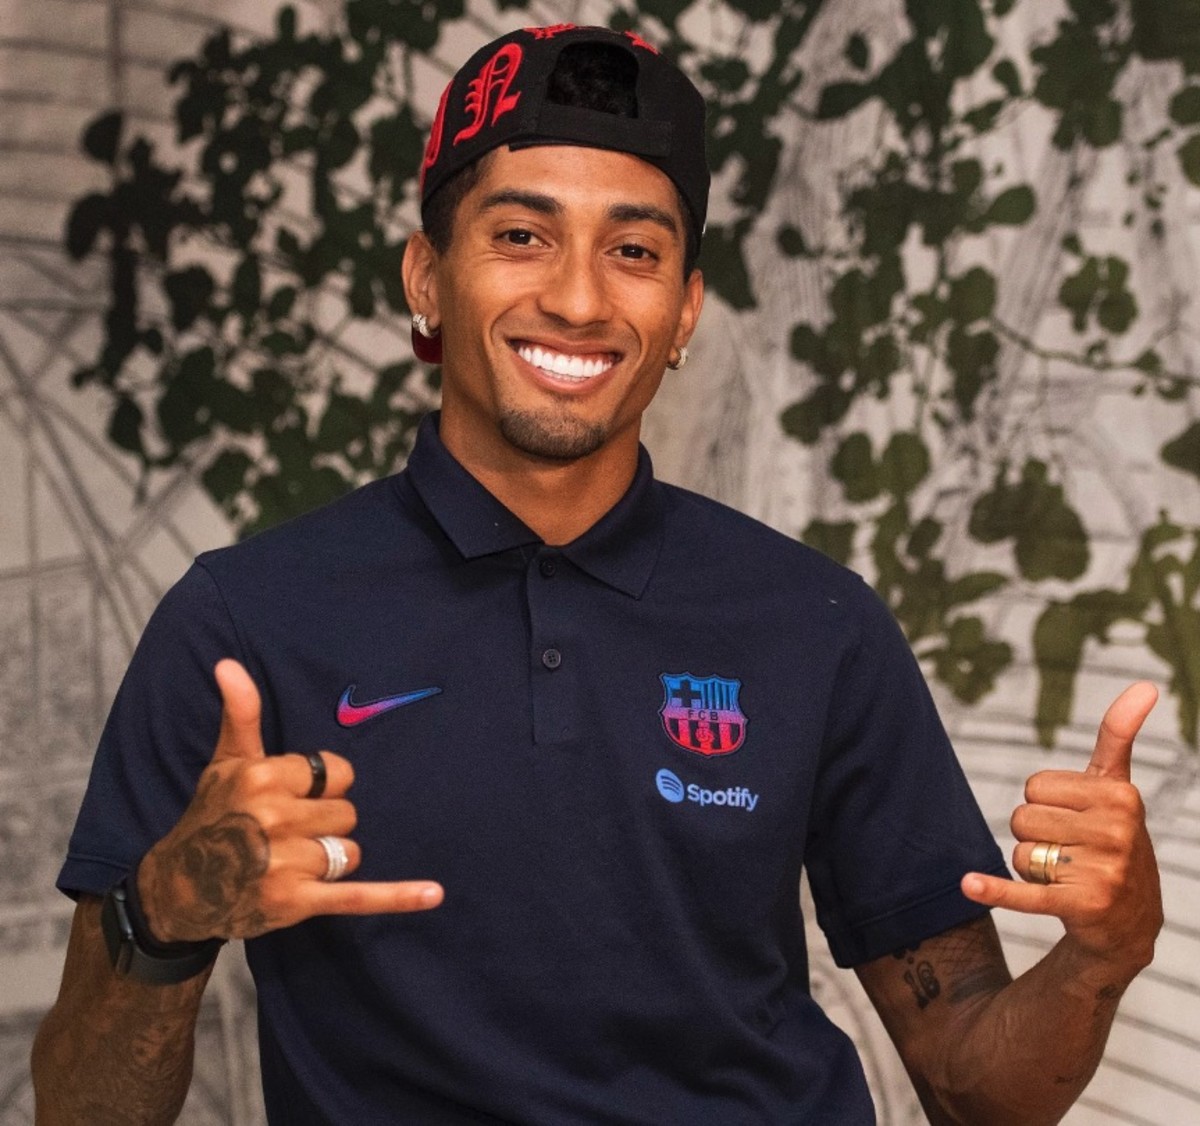 Raphinha pictured in a Barcelona polo shirt after arriving from Leeds United in a July 2022 transfer